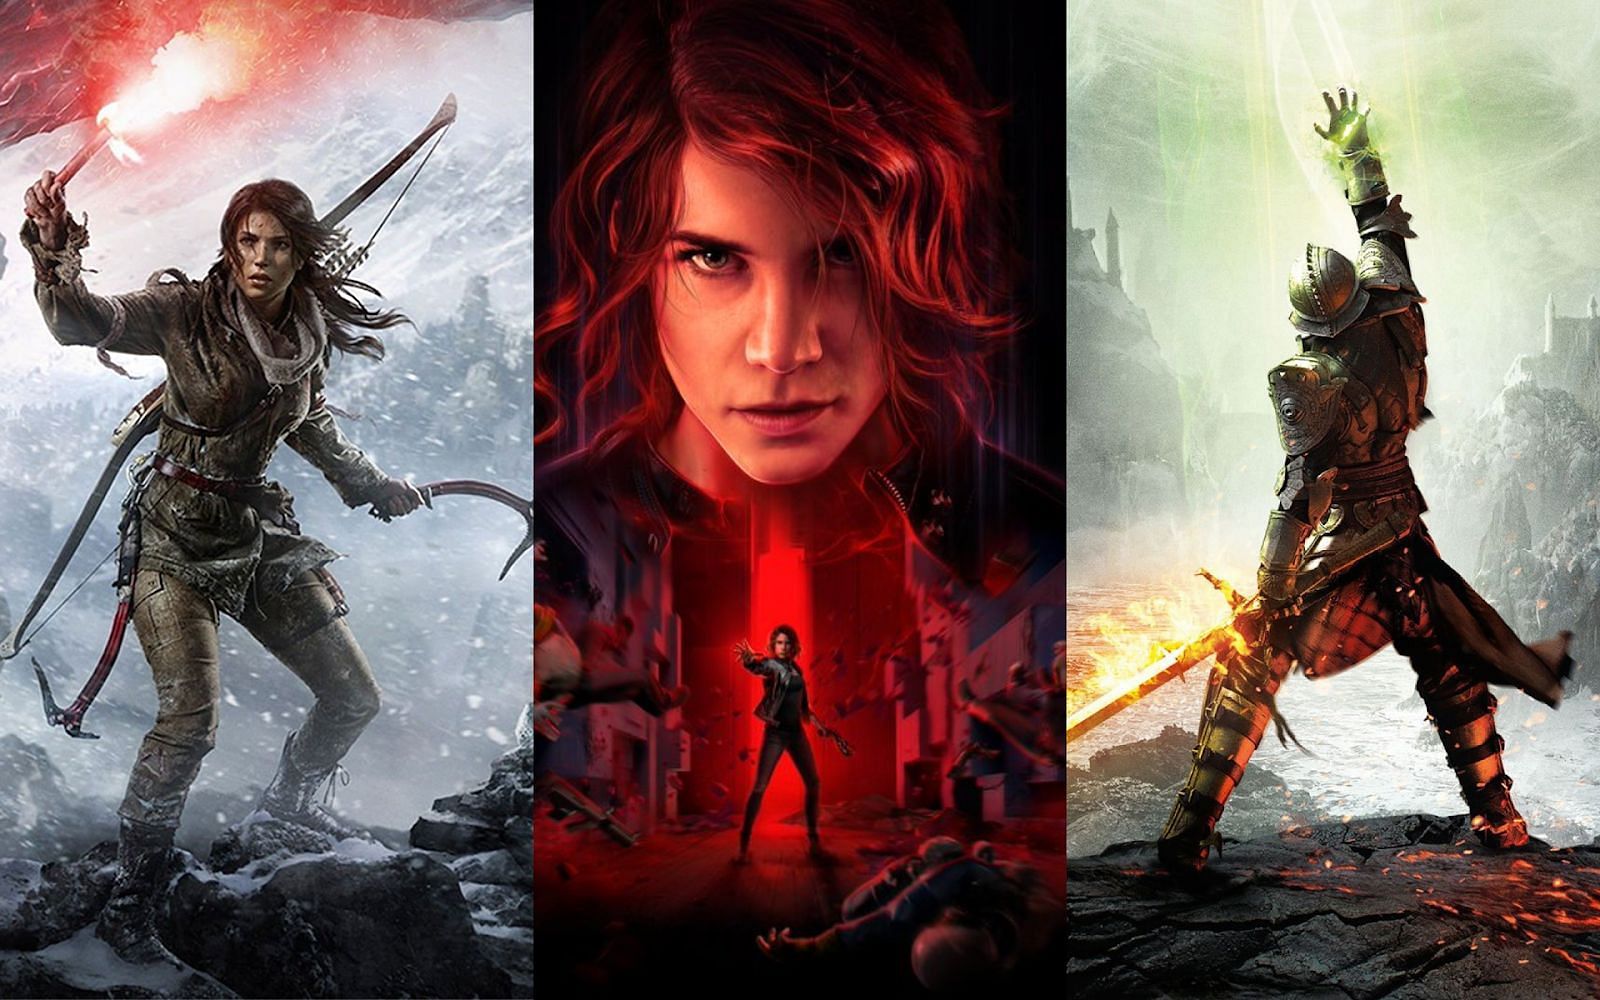 amazon Prime Gaming November free games include Control Ultimate Edition, Rise of the Tomb Raider, and Dragon Age Inquisition (Image by Sportskeeda)